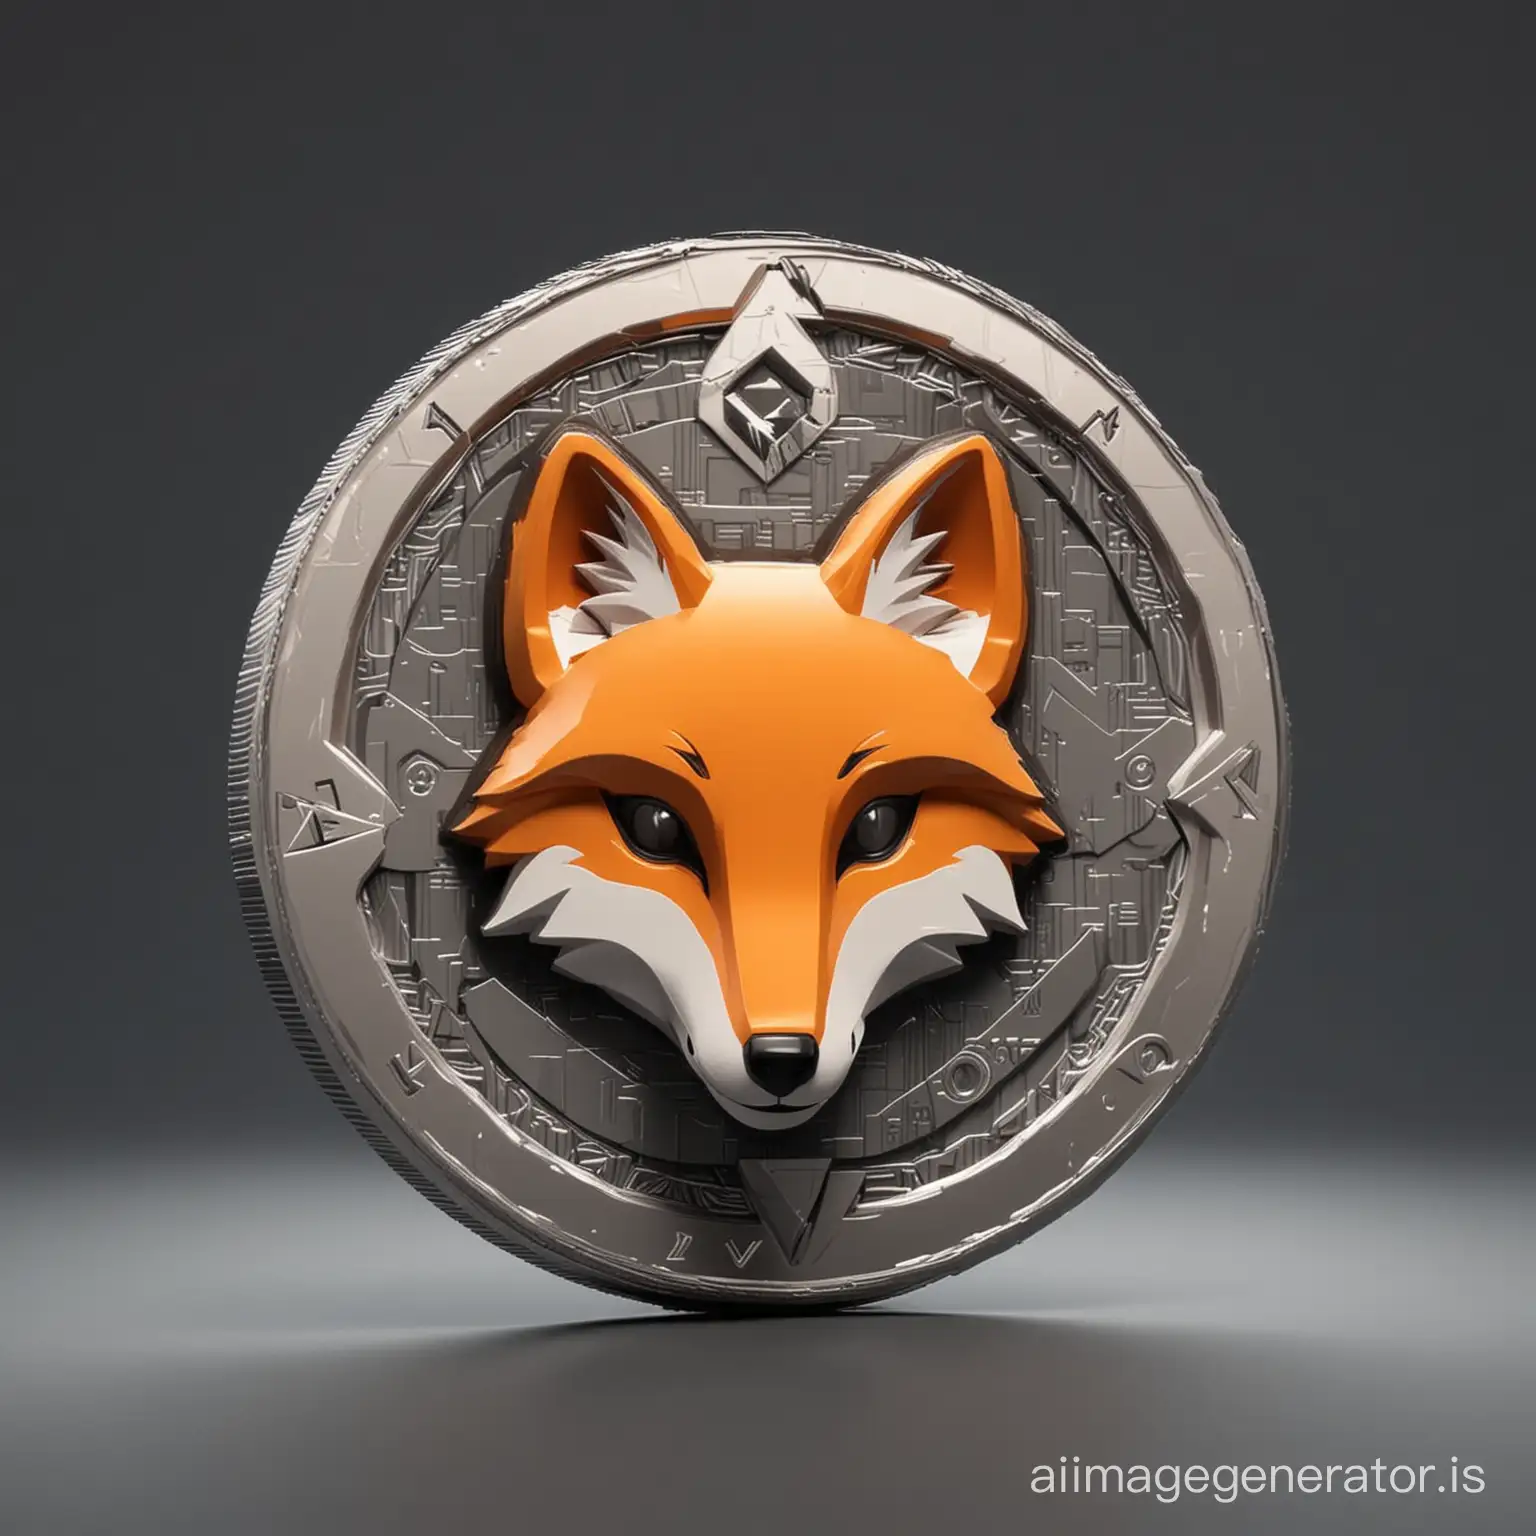 futuristic fox logo in coin style 3D without background 
NV mean NovaVortex its token for crypto currency